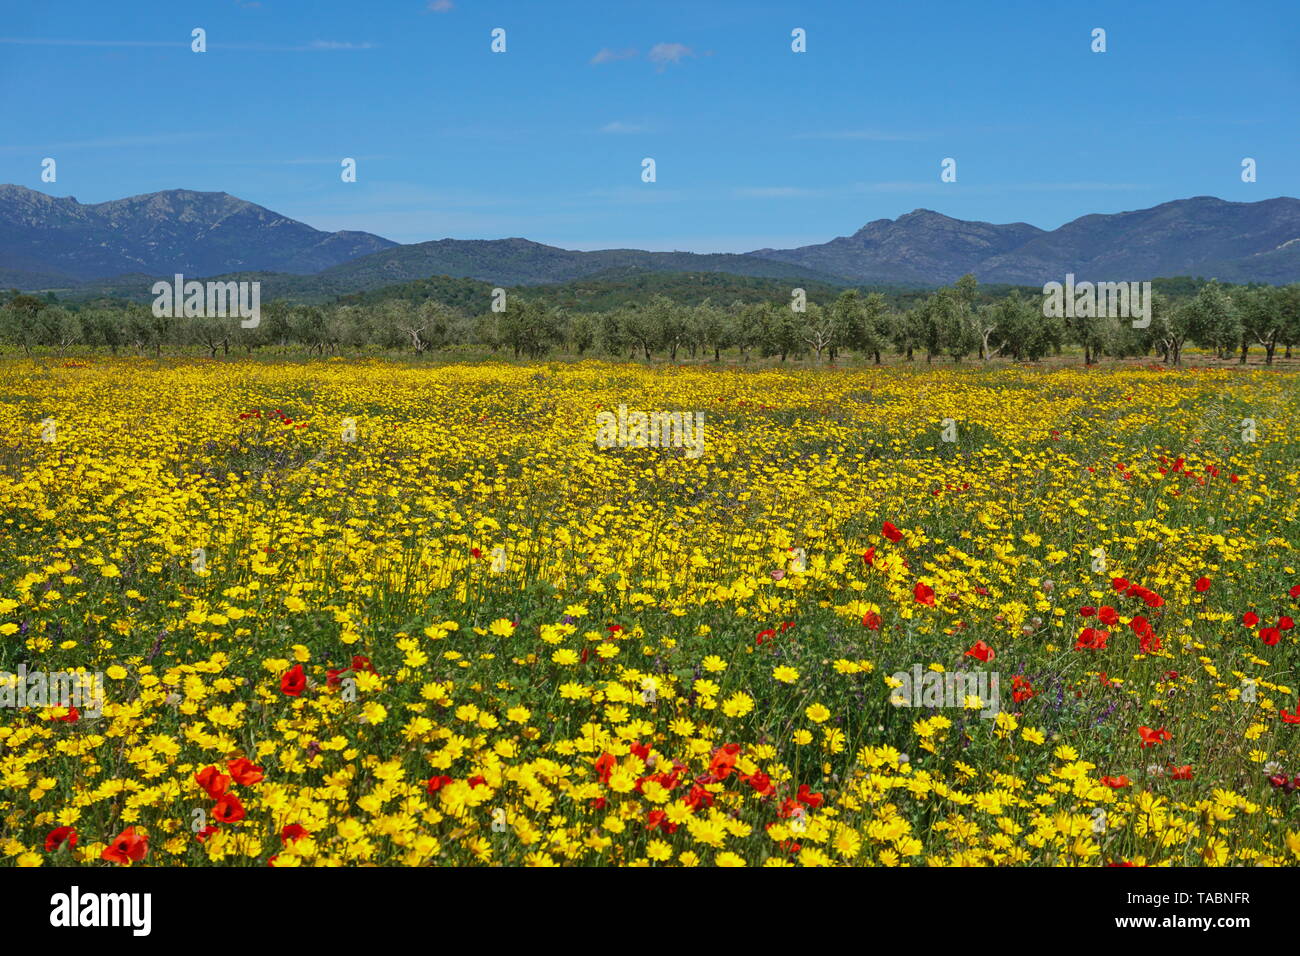 Spain landscape meadow of wild flowers, mostly corn marigold with few poppies, Mollet de Peralada, Alt Emporda, Girona province, Catalonia Stock Photo